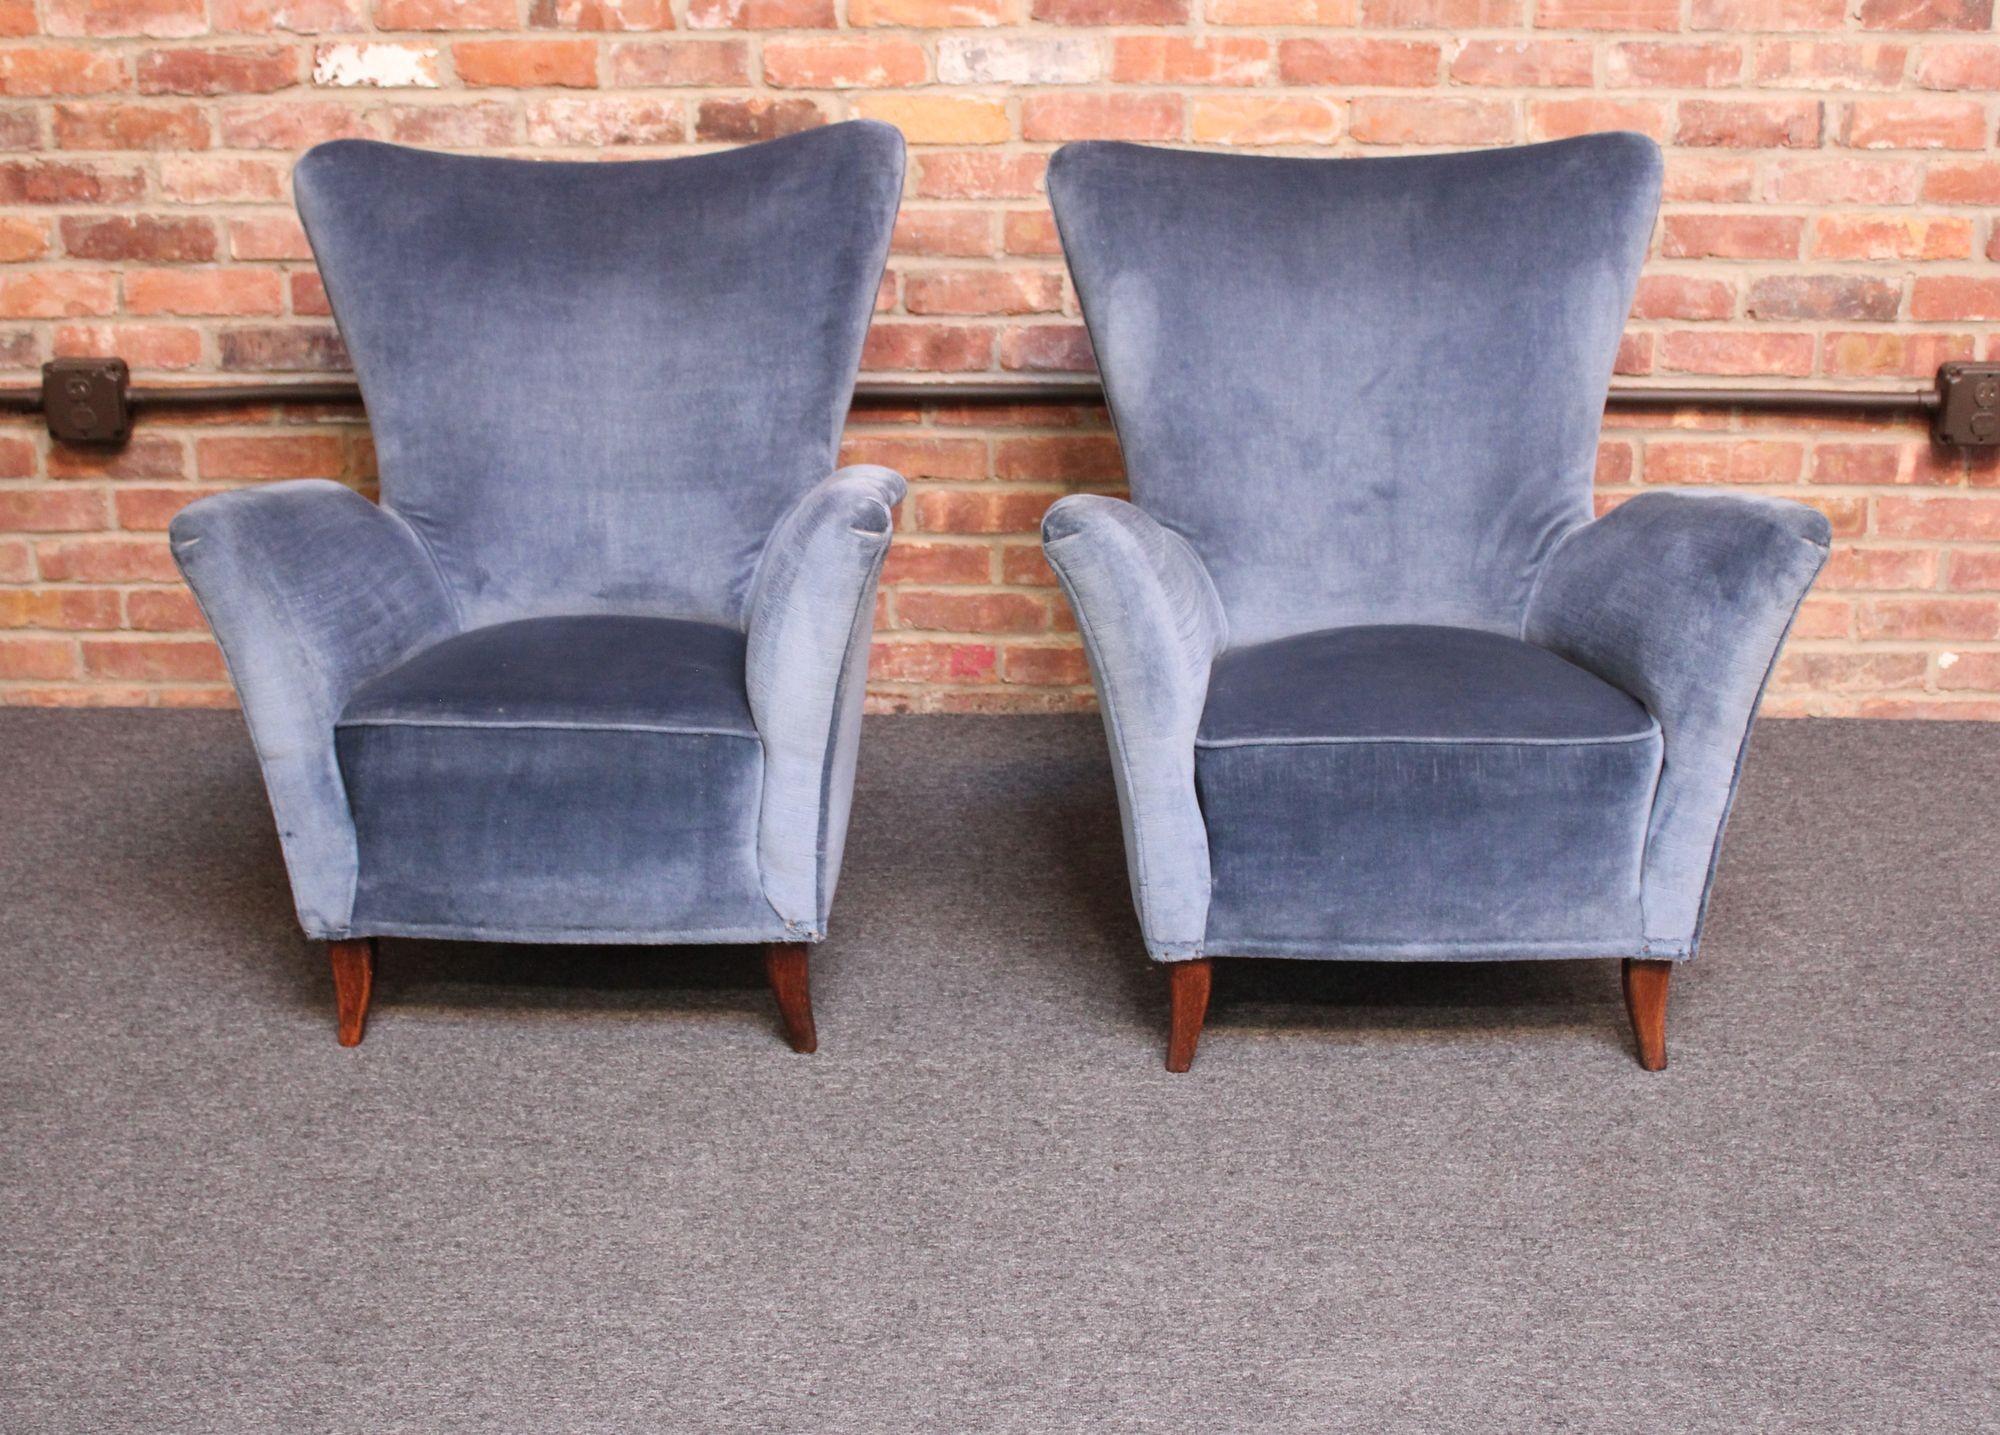 Pair of Italian modern lounge chairs with elegant, sweeping lines and subtle high, wing-back form supported by delicately curved stained mahogany legs (ca. 1950s, Italy).
Dramatic, deeply sculpted armrests show well from all angles, adding sharp